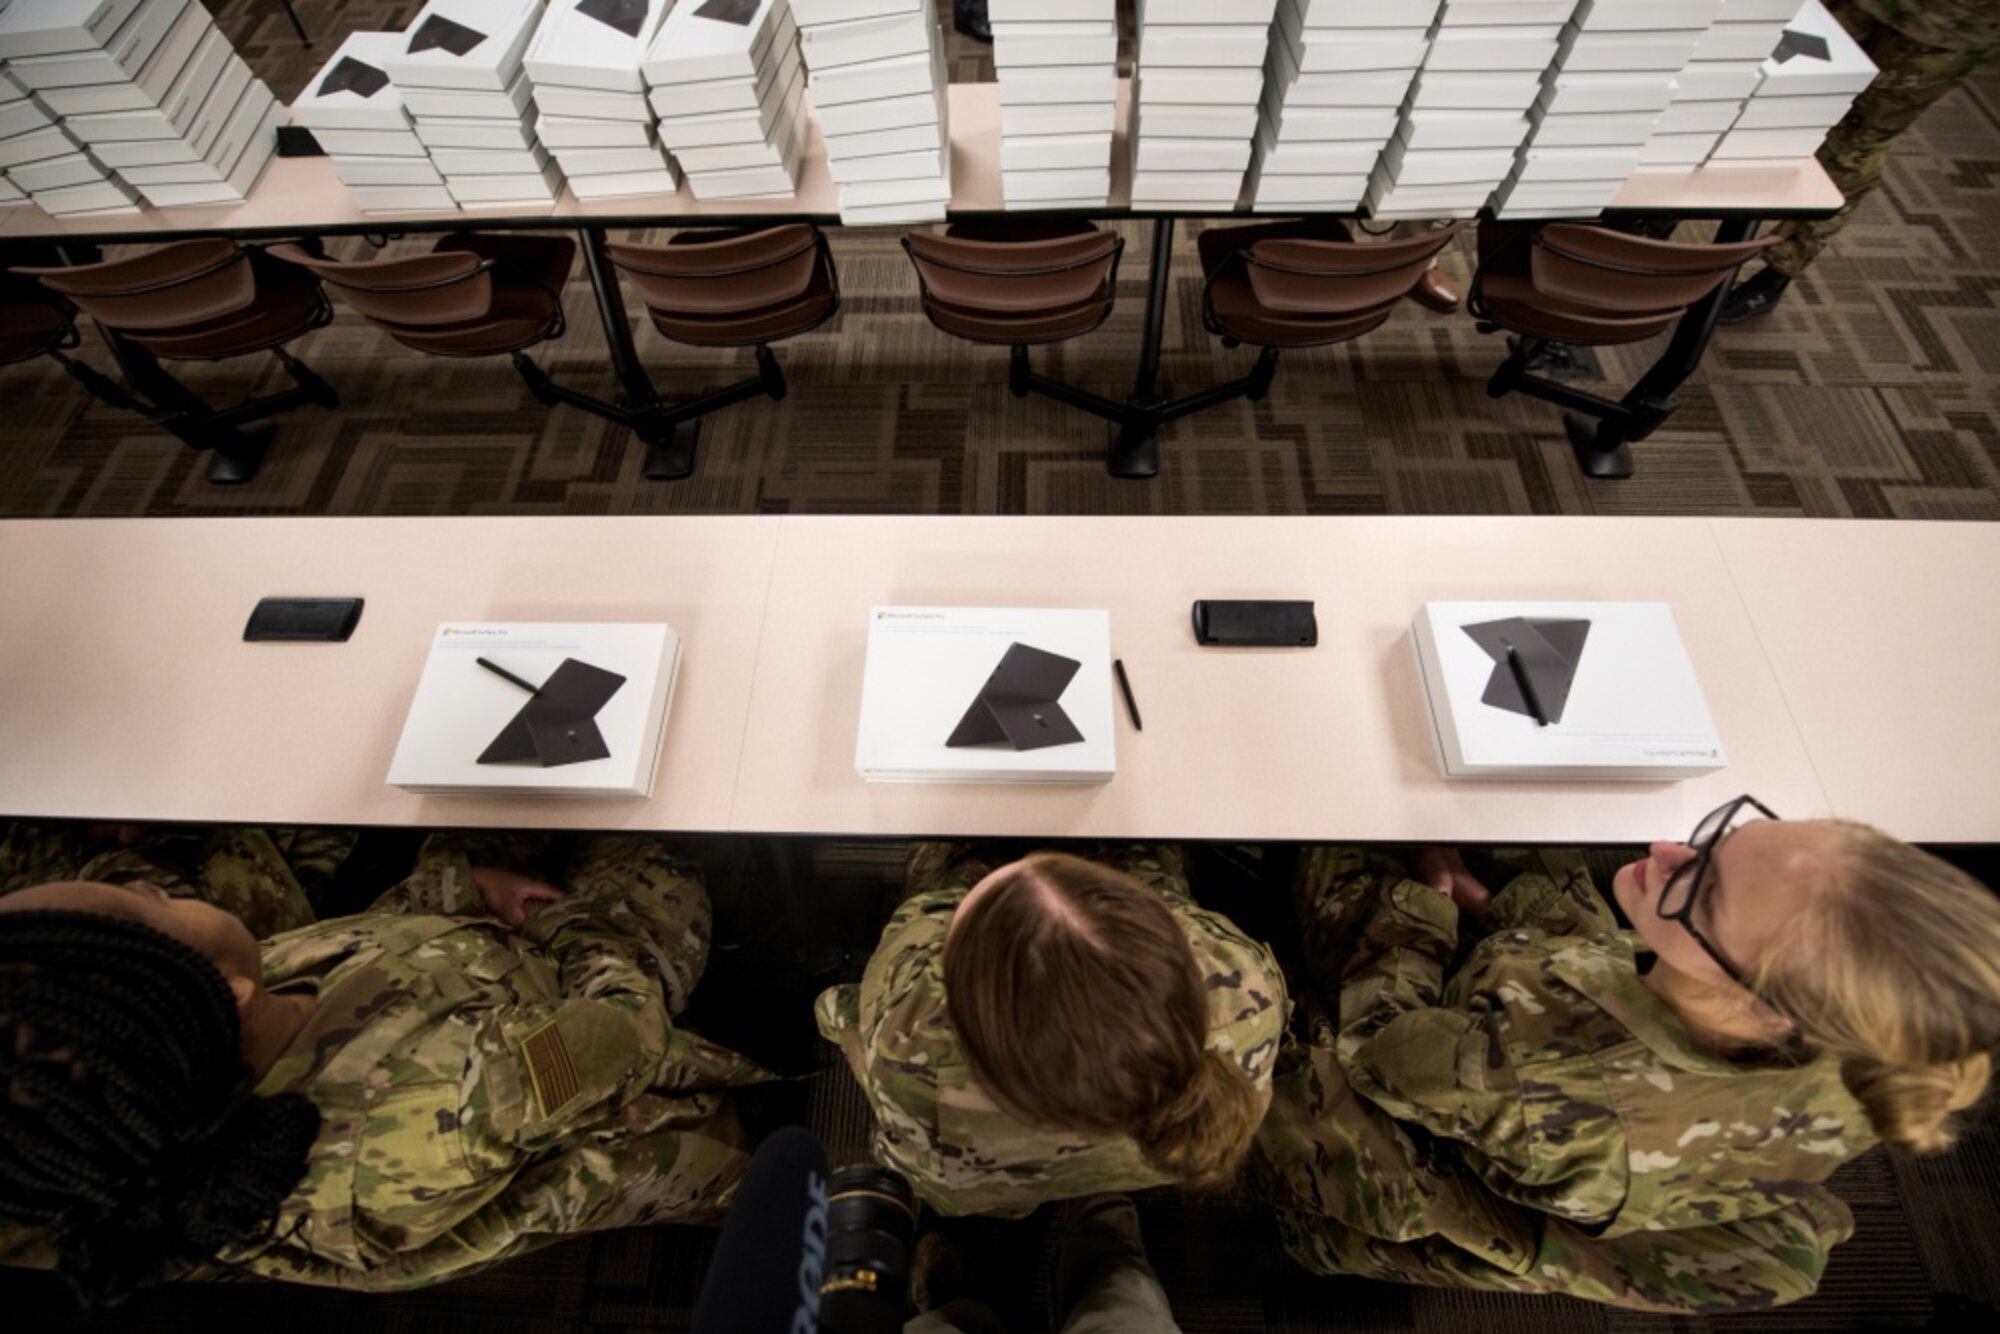 U.S. Air Force basic military training trainees are issued personal computers during in-processing as part of a pilot test under a Cooperative Research and Development Agreement partnership at Joint Base San Antonio-Lackland, Texas, Dec. 11, 2019. The computers replace all hard copy textbooks BMT trainees currently use with the intent to help BMT assess learning outcomes, value and return on investment. (U.S. Air Force photo by Sarayuth Pinthong)